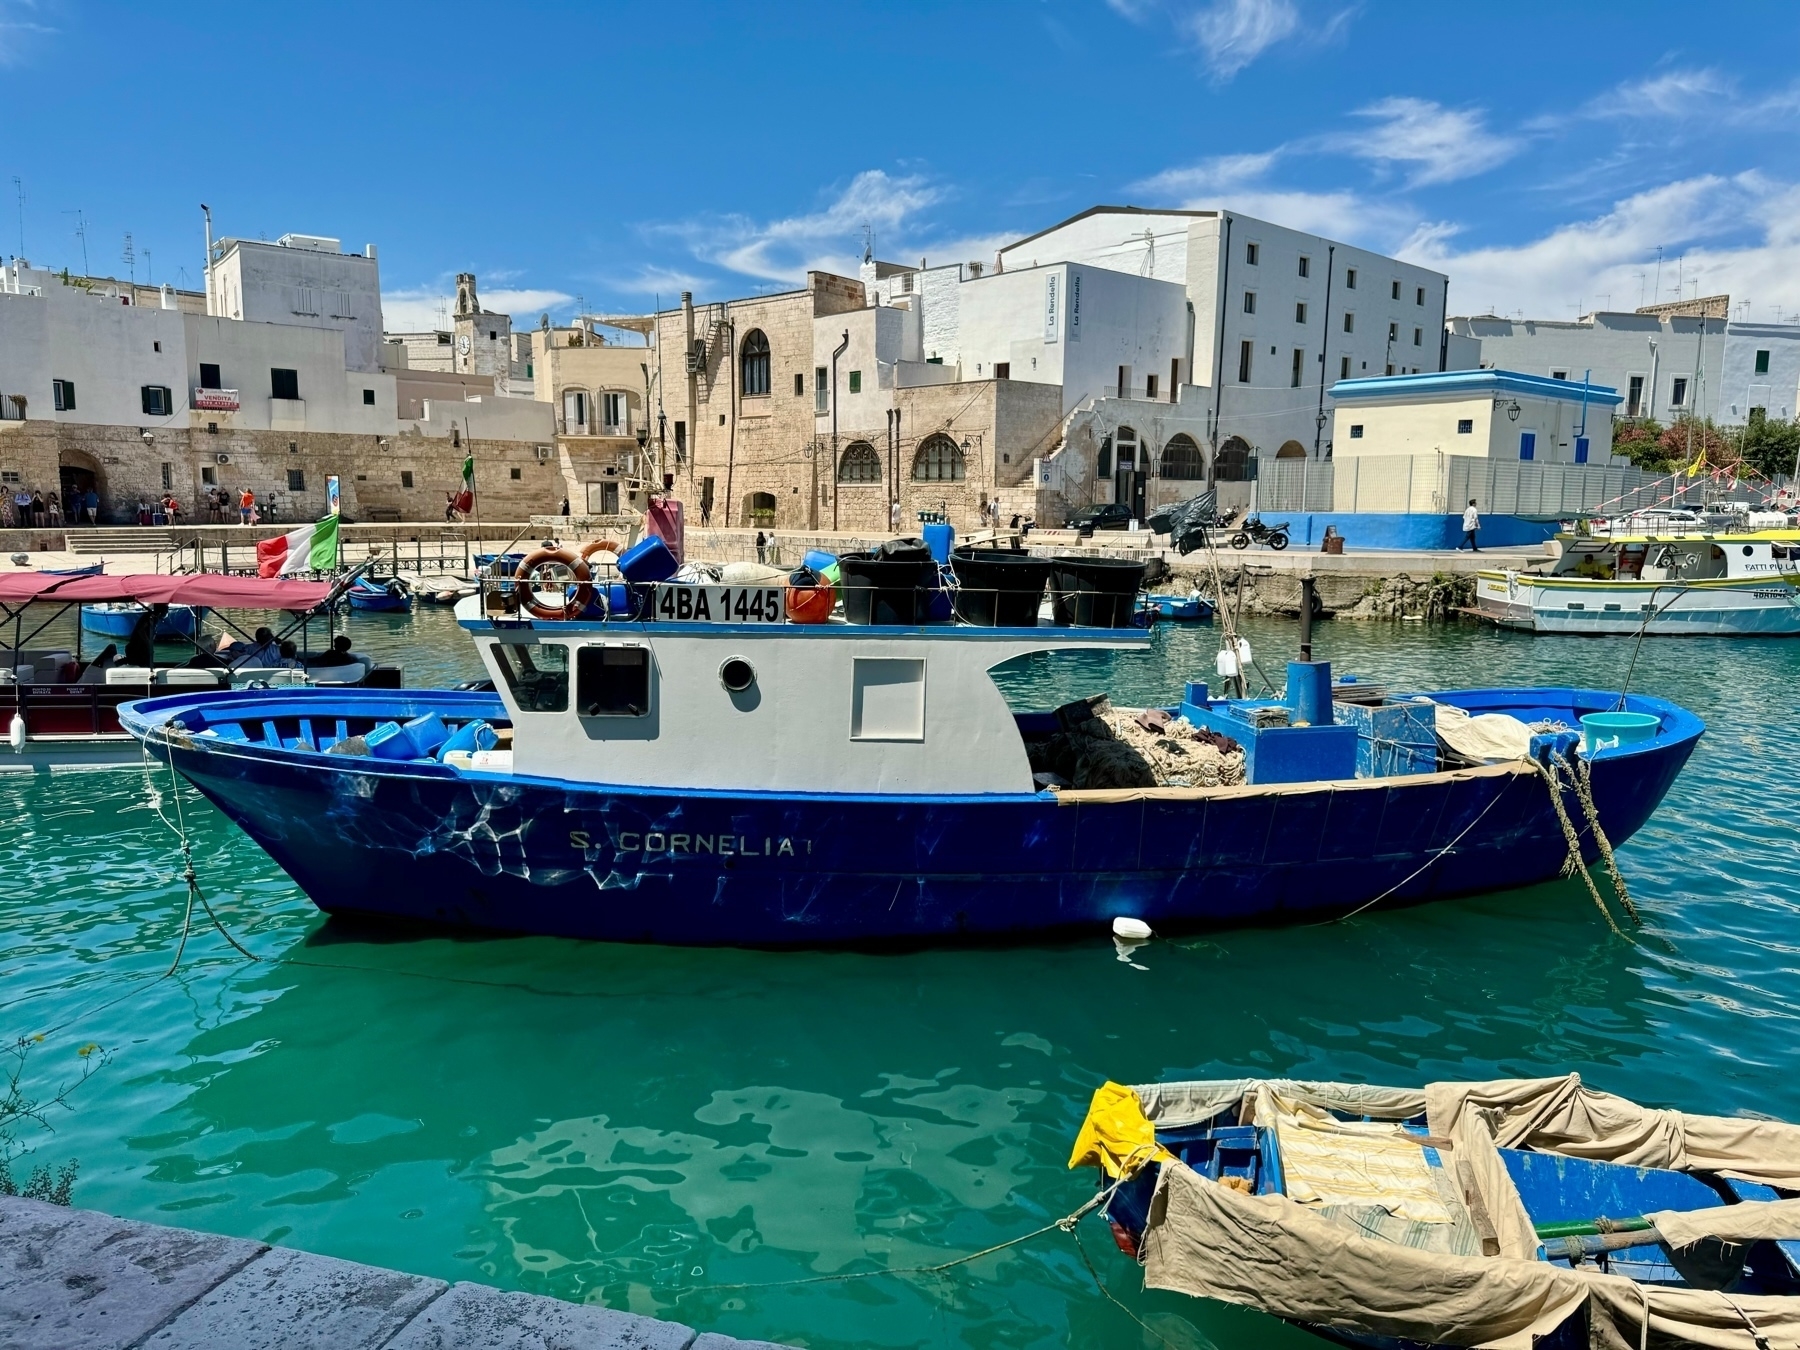 A blue fishing boat named “S. Cornelia” docked at a waterfront with several other boats nearby. The boat is moored in clear turquoise water against a backdrop of historic buildings with a mix of white and stone facades. 